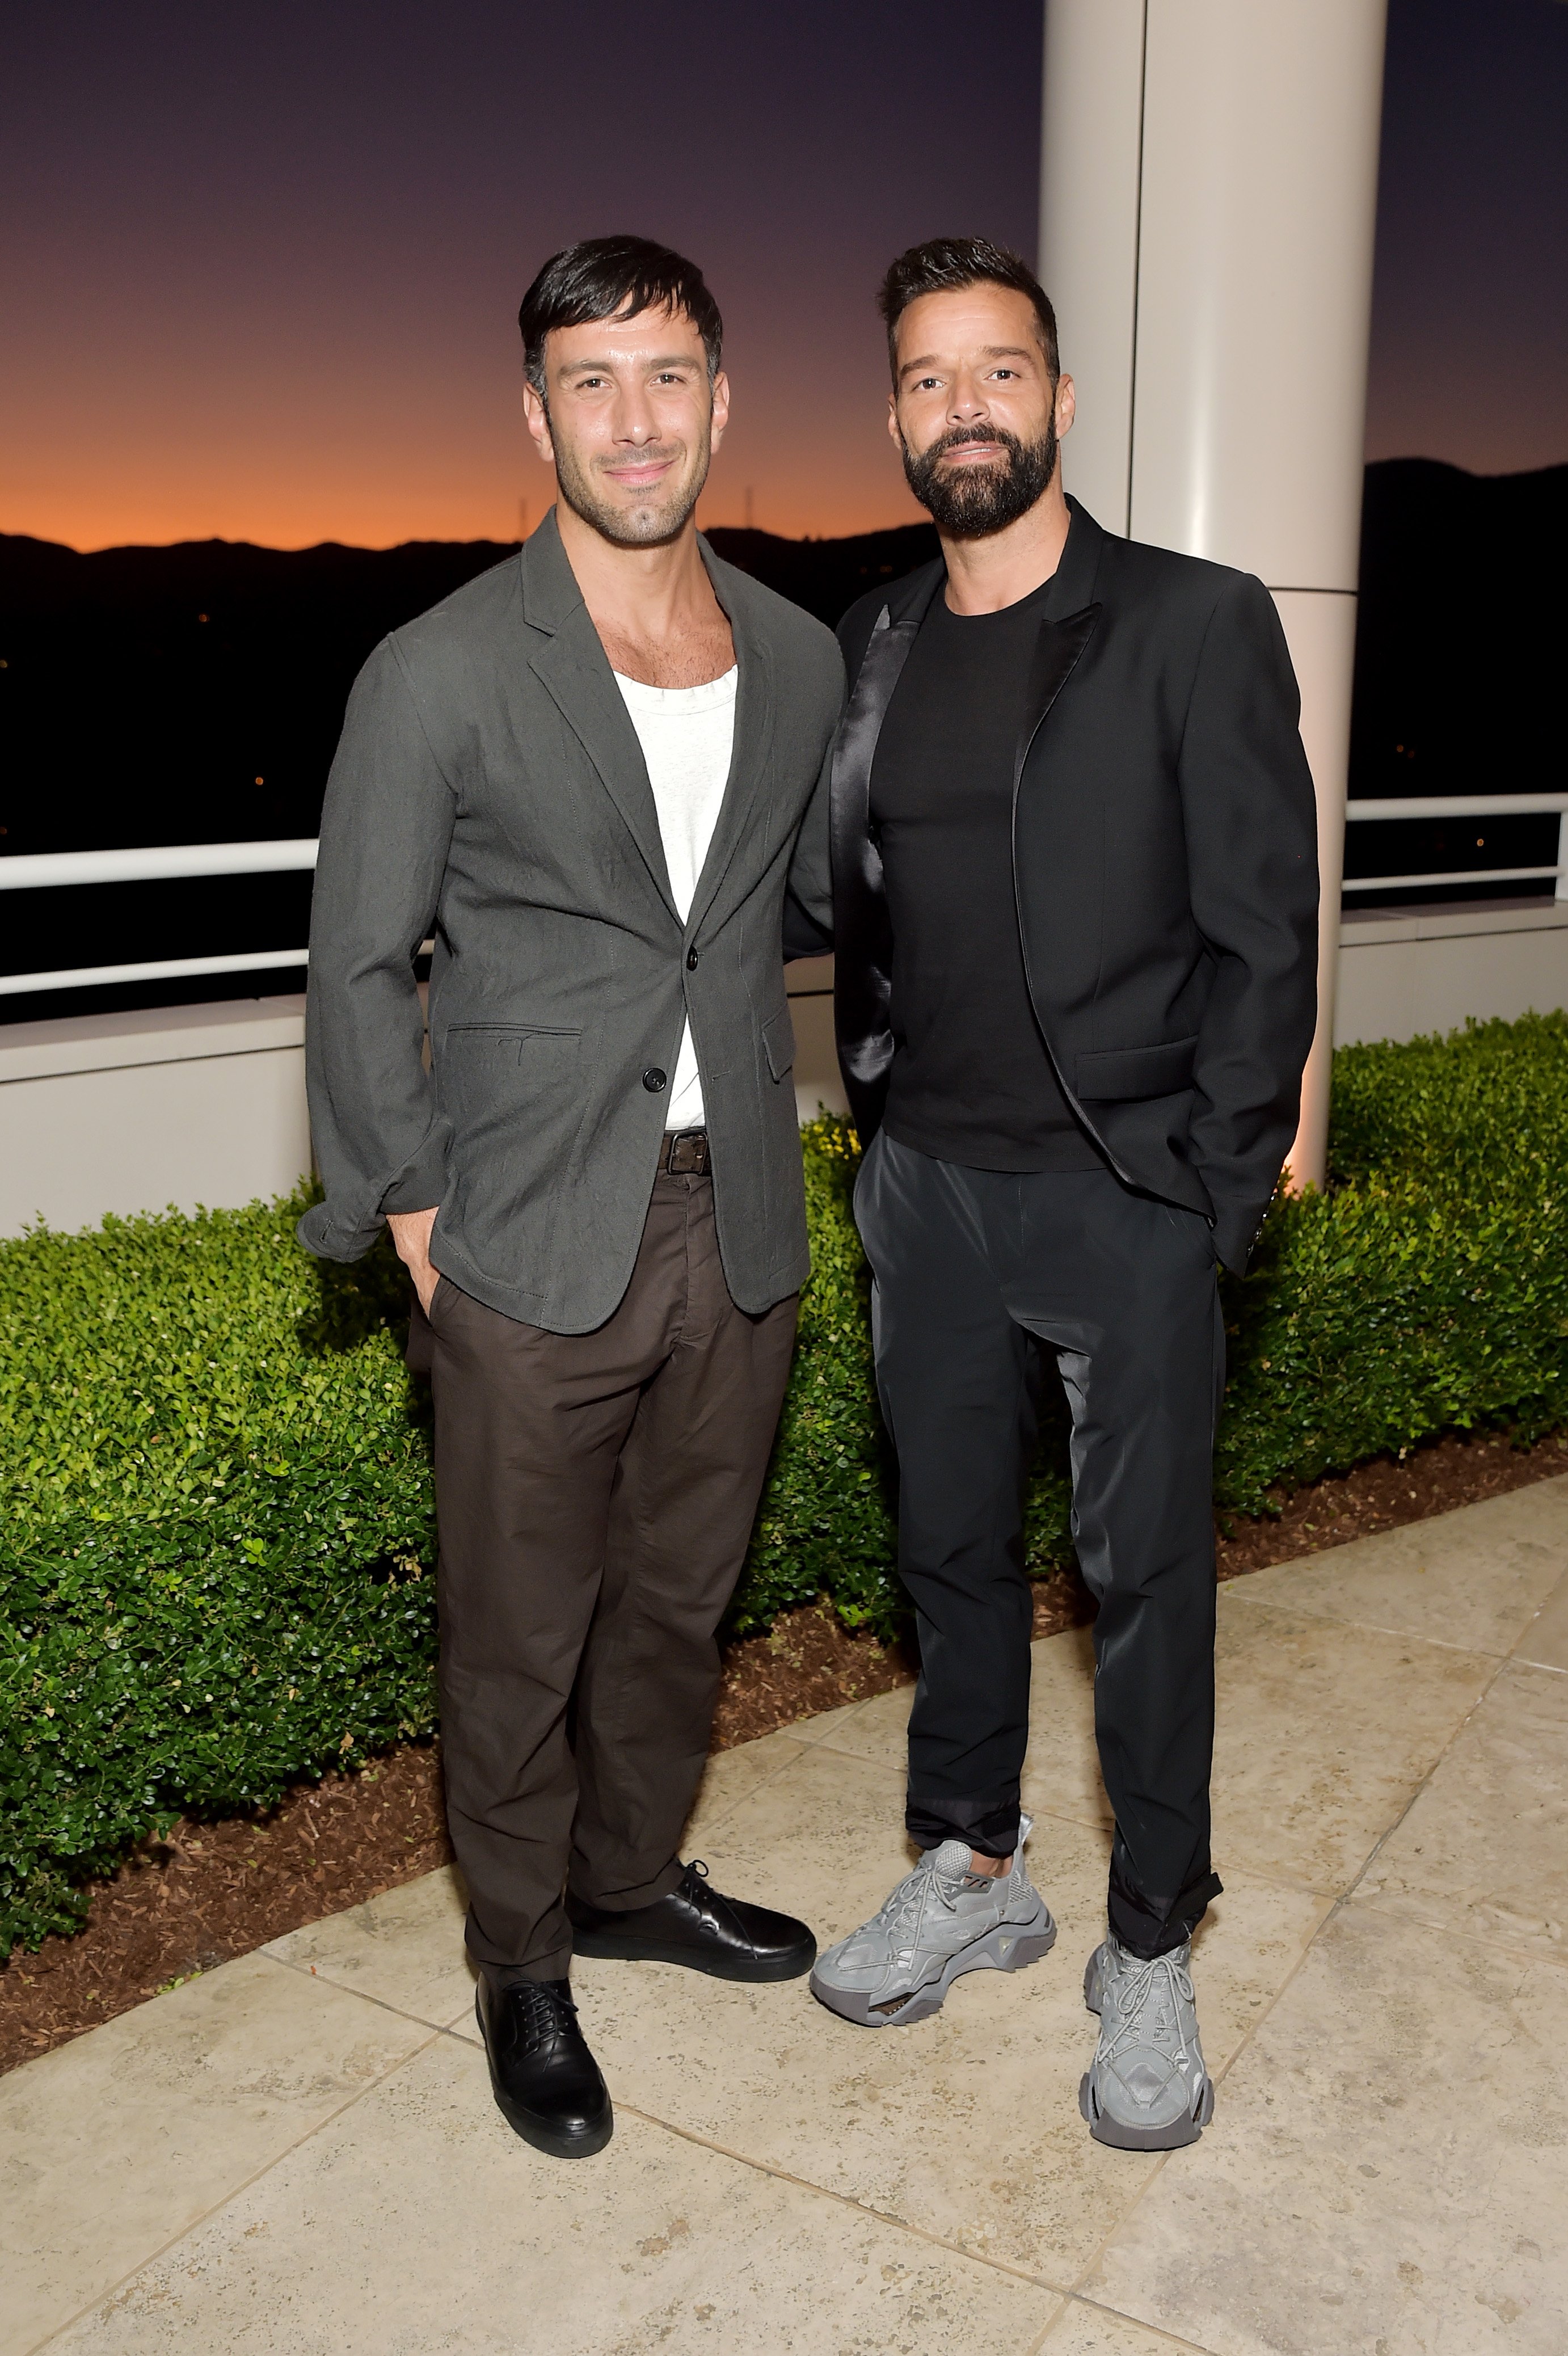 Jwan Yosef and Ricky Martin on September 16, 2019 | Photo: Getty Images